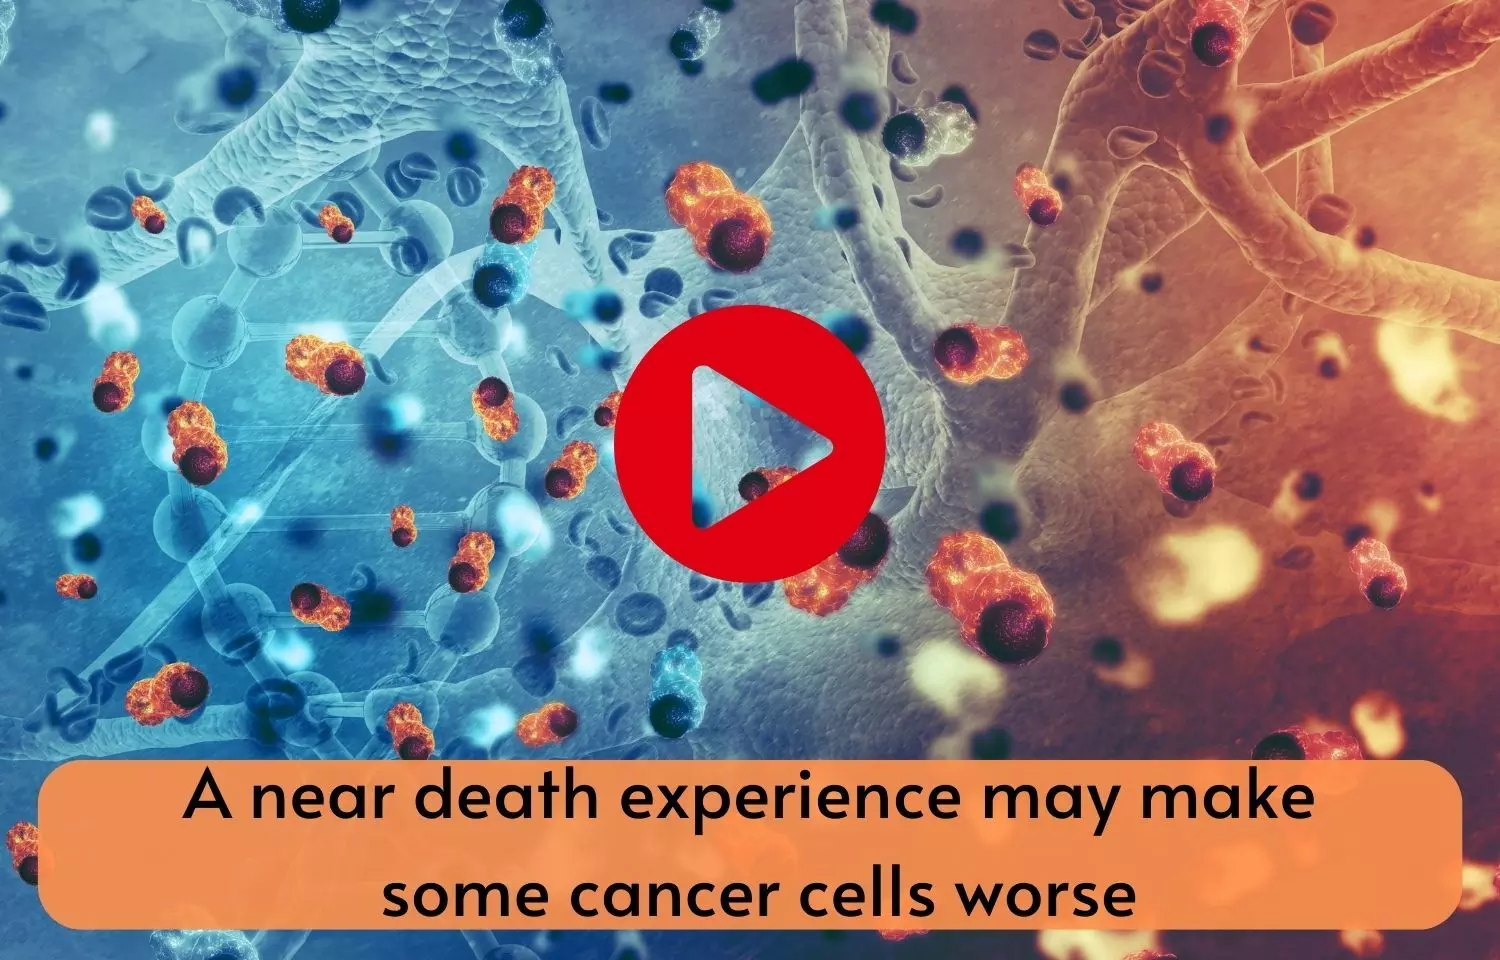 A near death experience may make some cancer cells worse